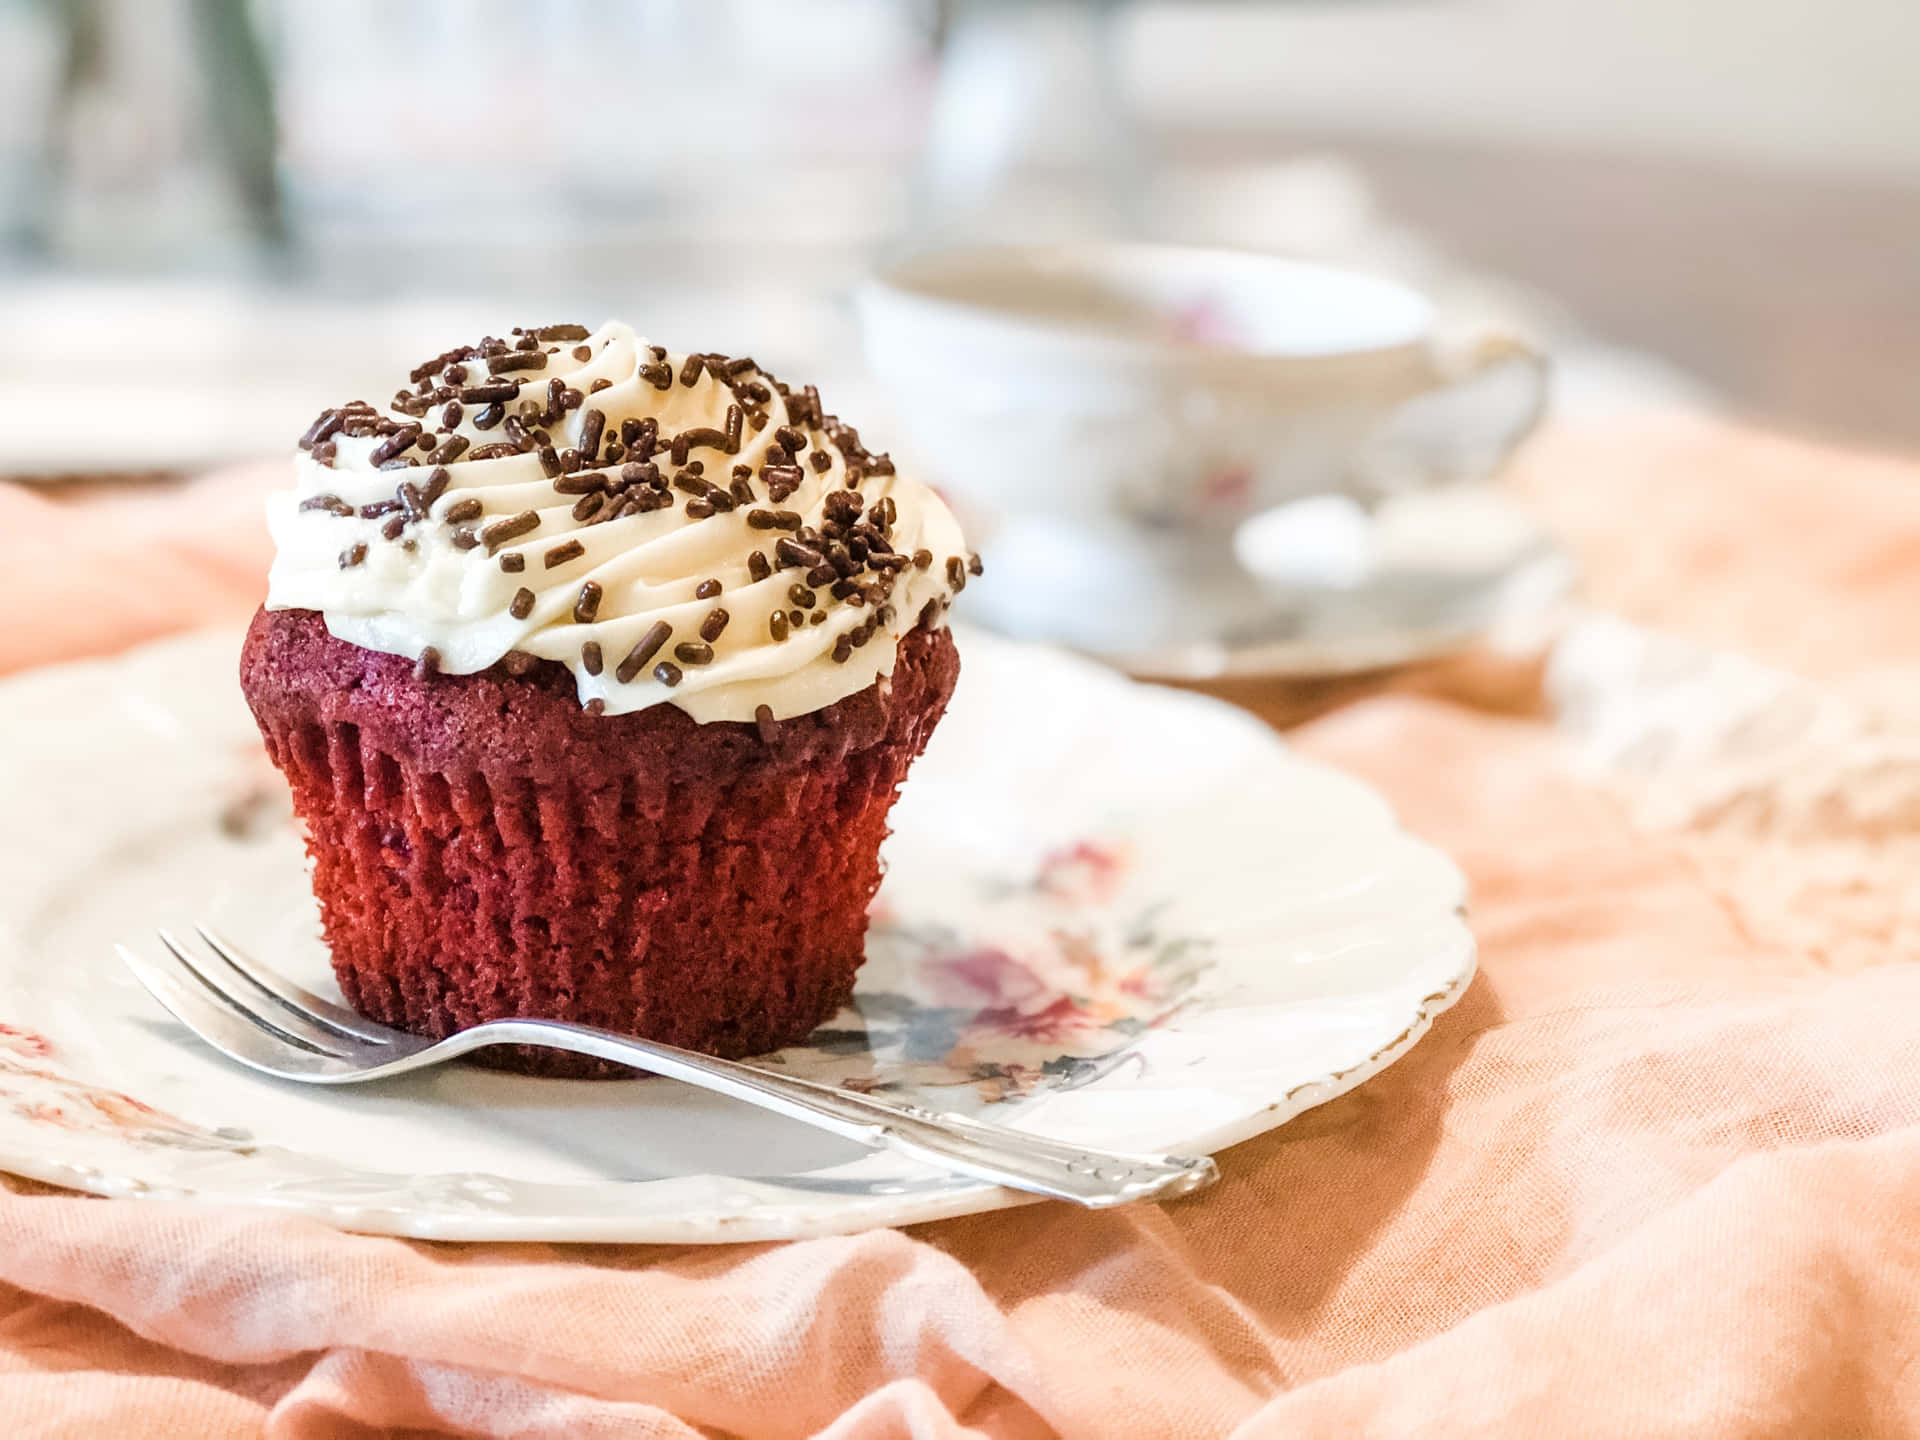 Enjoy a deliciously sweet treat with a cupcake!